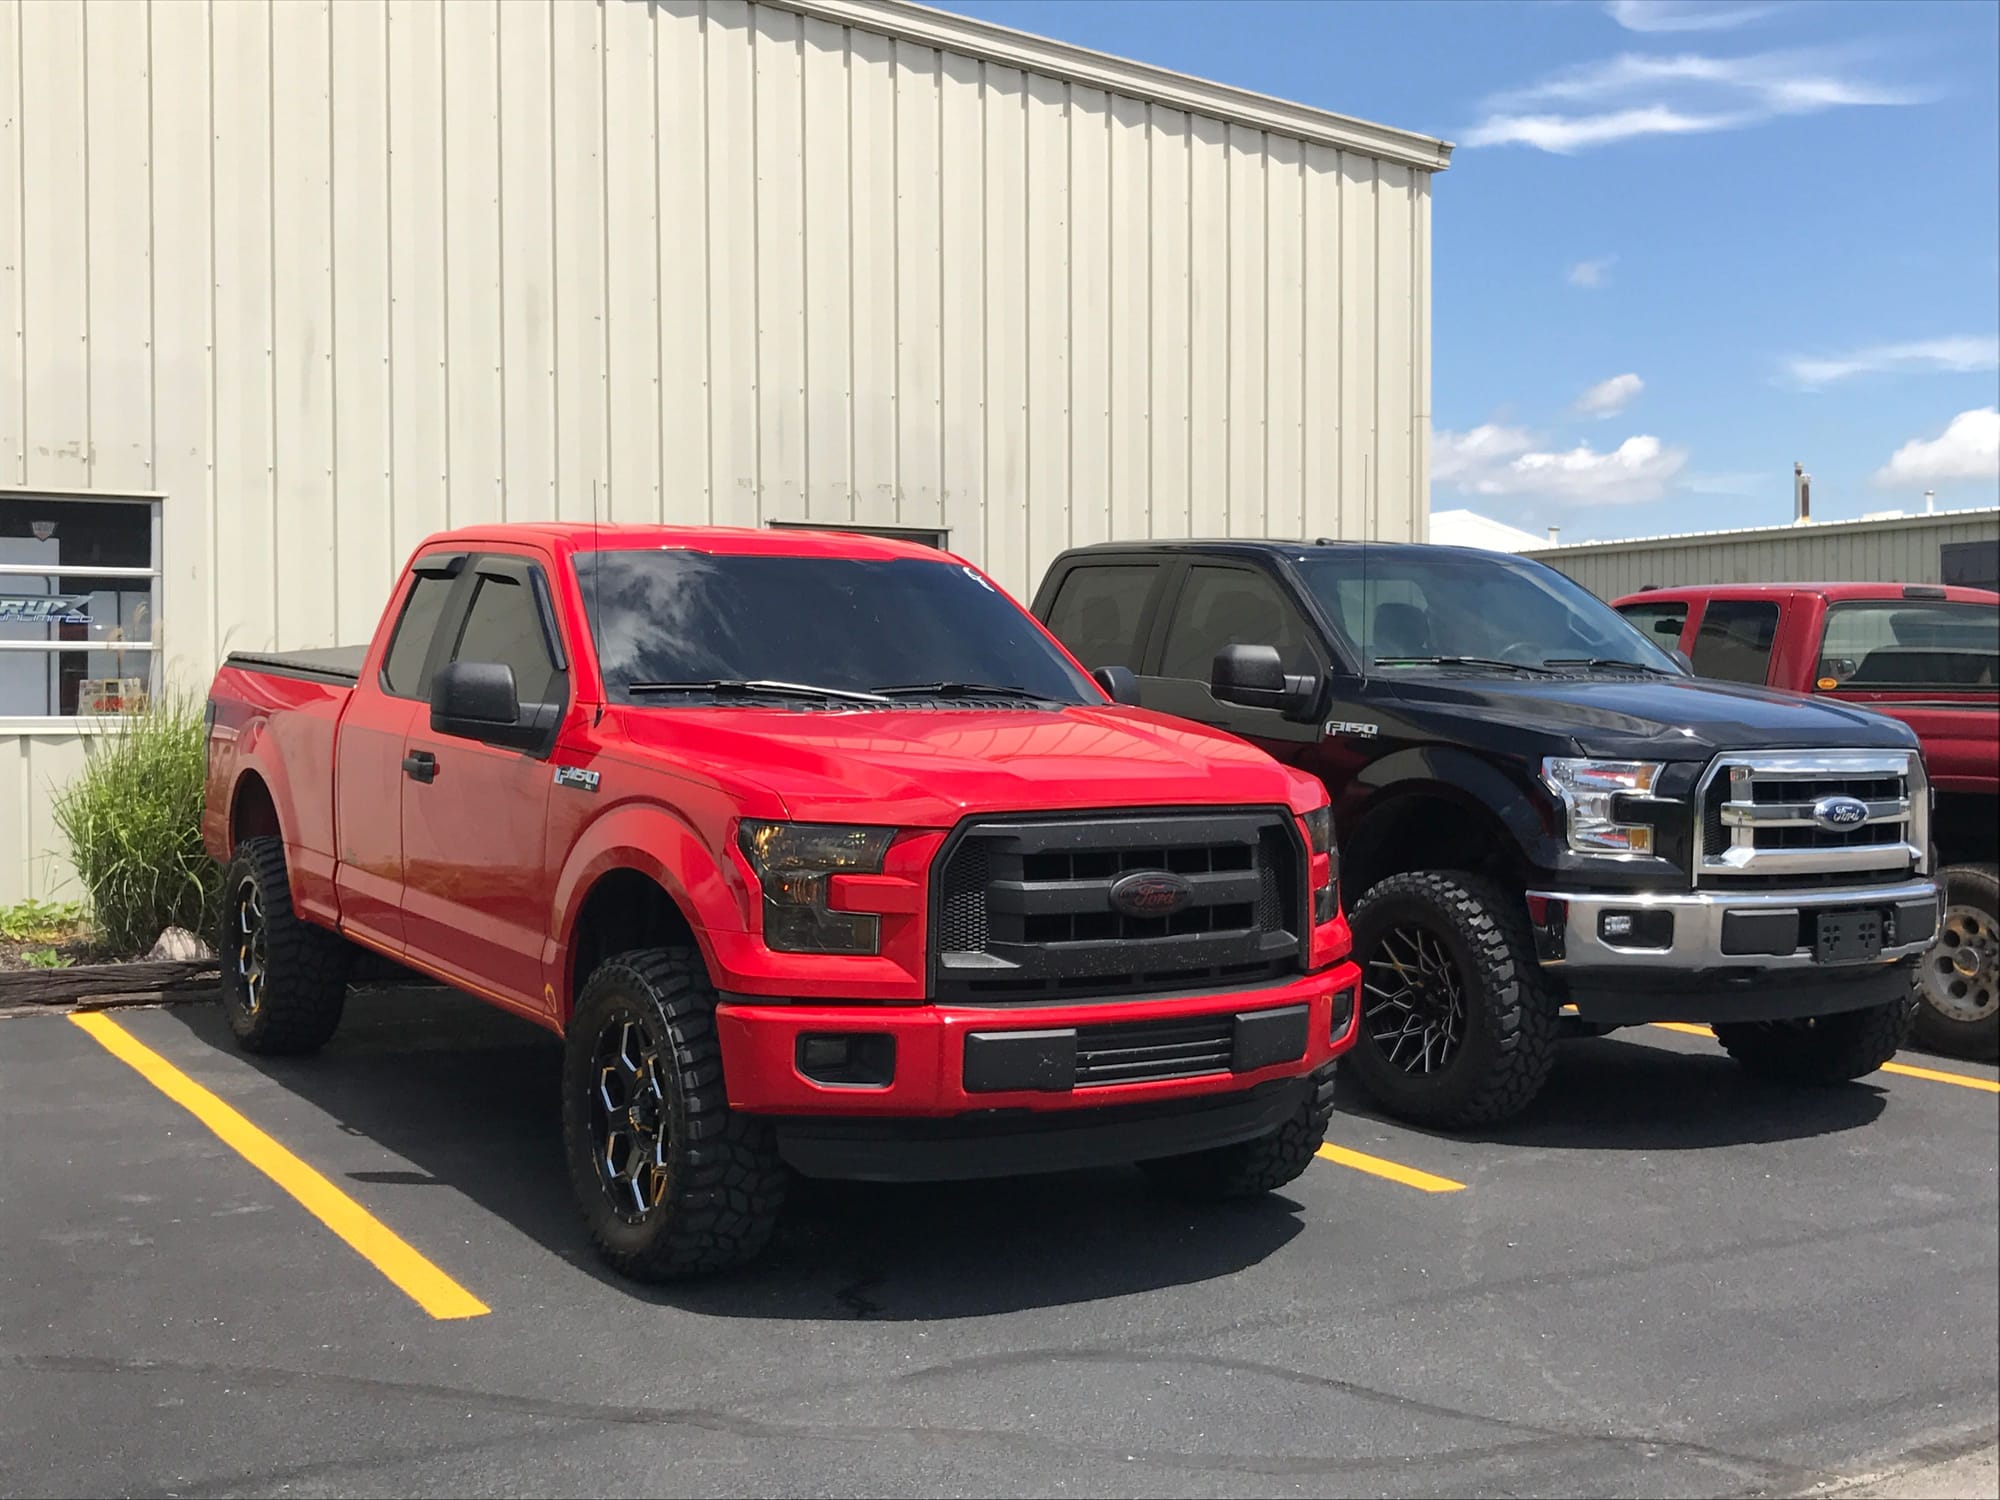 4 inch lift next to 6 inch - Ford F150 Forum - Community of Ford Truck Fans 6 Inch Lift Vs 4 Inch Lift